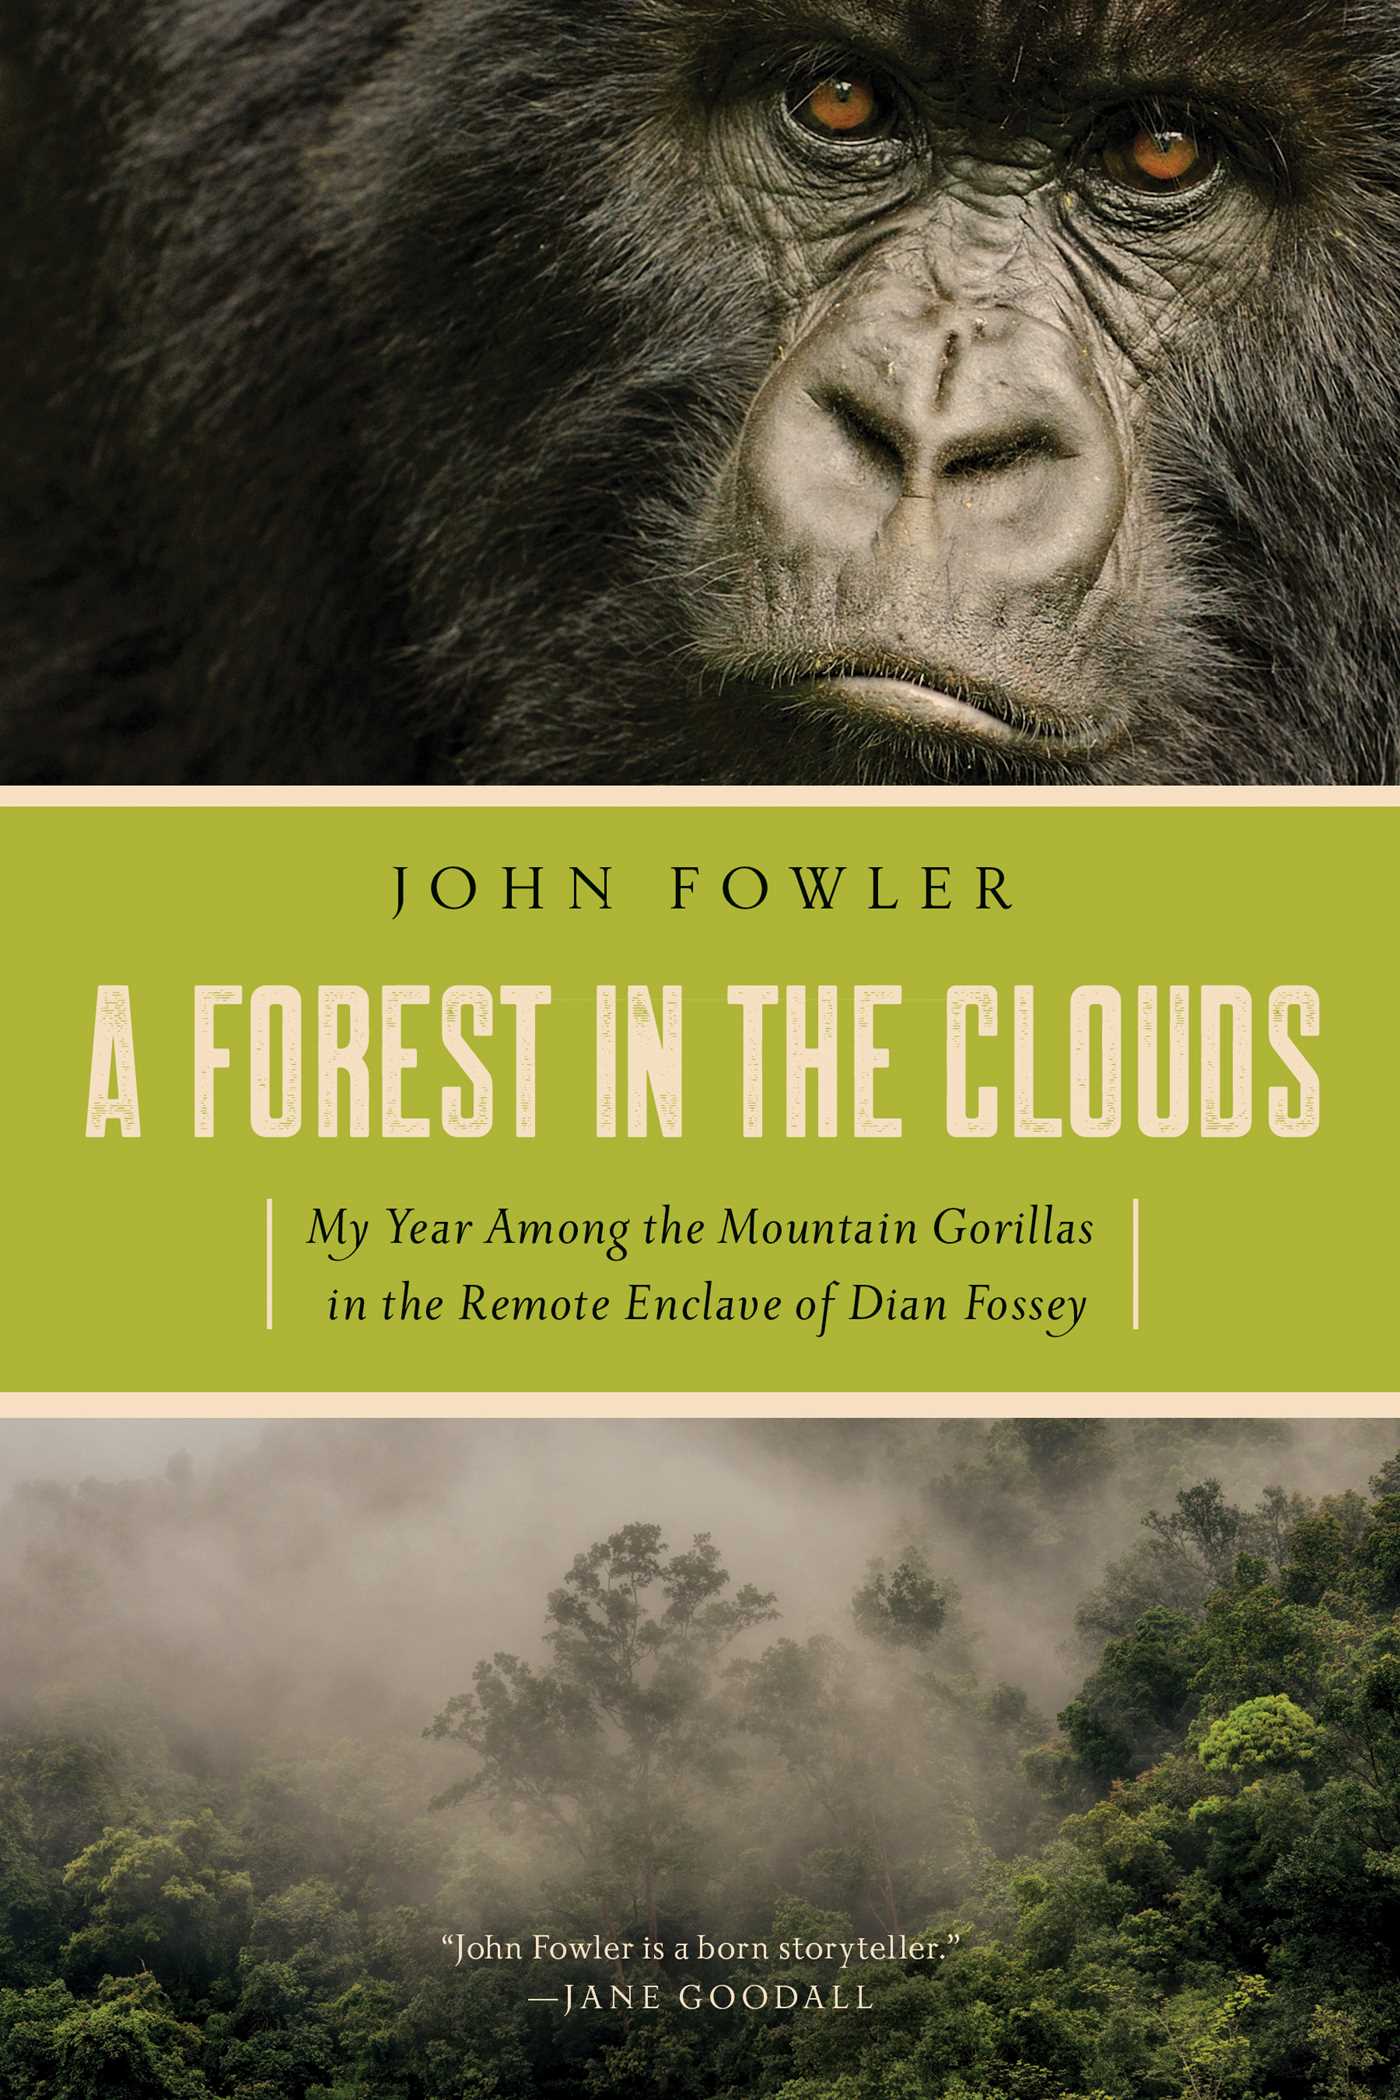 A forest in the Clouds book jacket cover